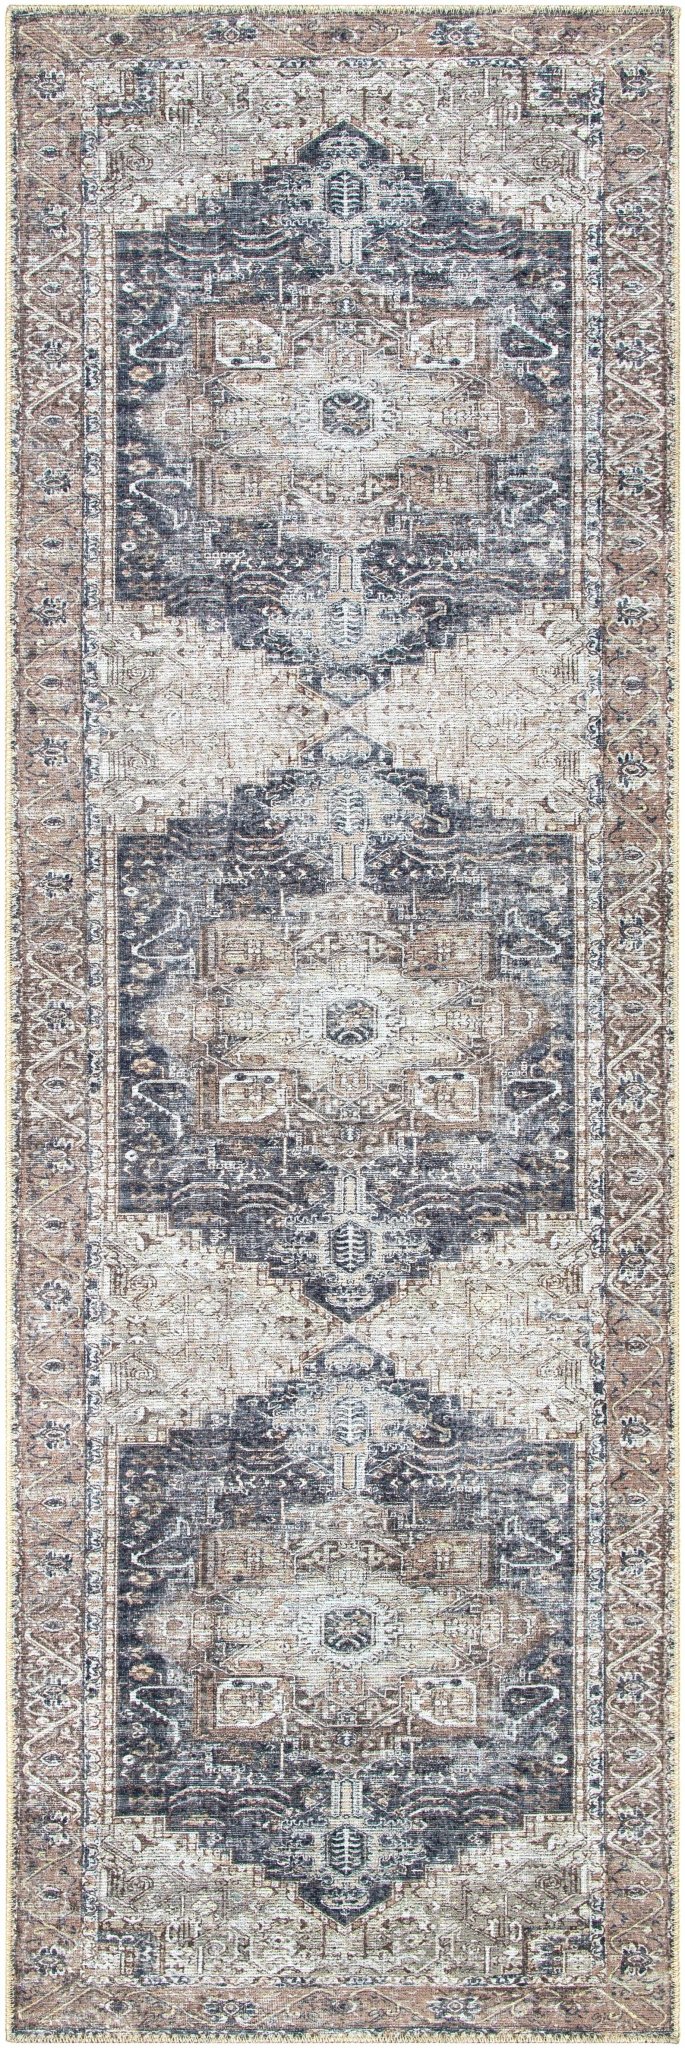 Vintage Style Ivory, Charcoal and Brown Traditional Medallion Design Machine Washable Area Rug - The Rug Decor